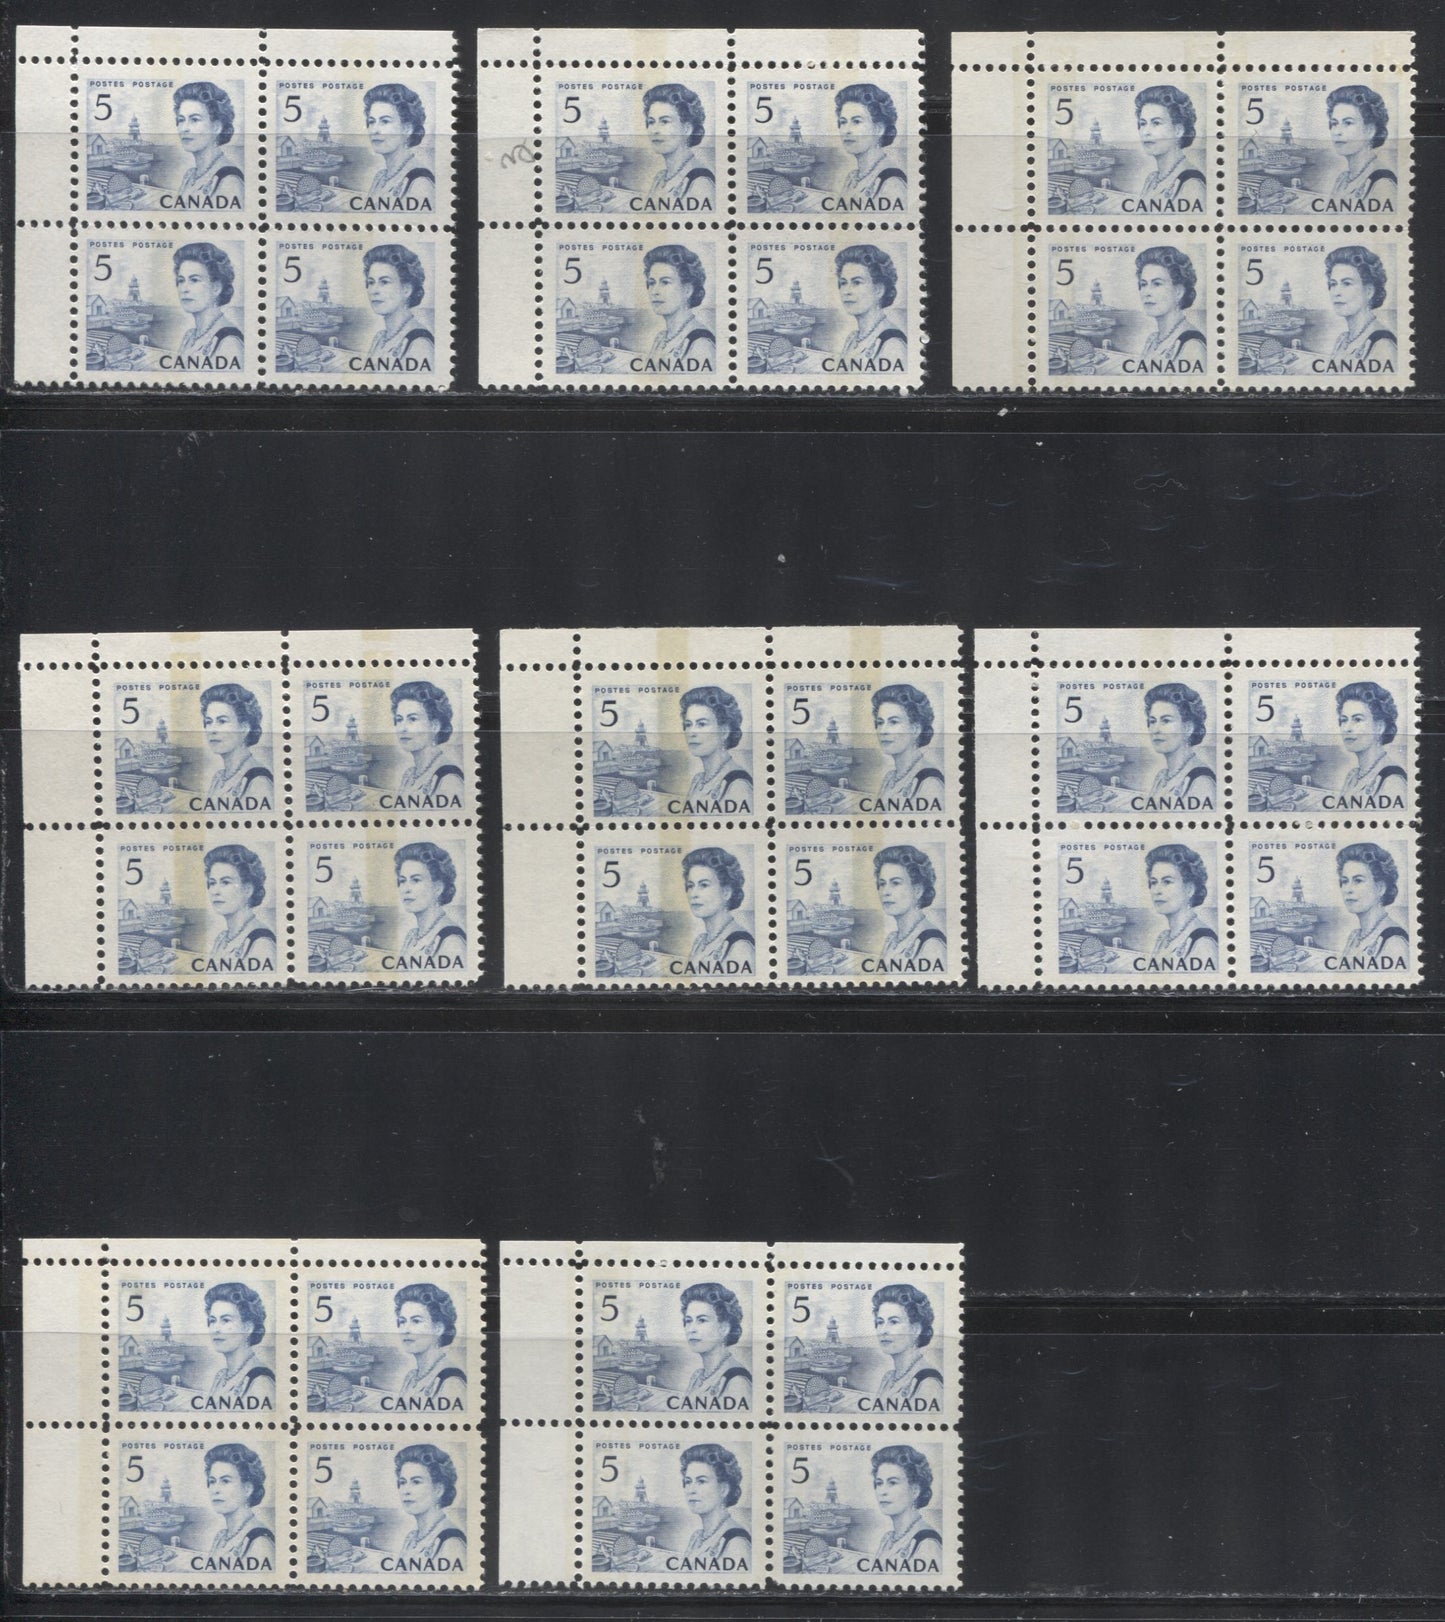 Lot 198 Canada #458p-459piii 5c Deep Blue Atlantic Fishing Village, 1967-1973 Centennial Definitive Issue, Lower Left Tagged Corner Blocks, A Specialized VFNH Group of 8 Blocks on Different Papers, Different Shades and Different Gums